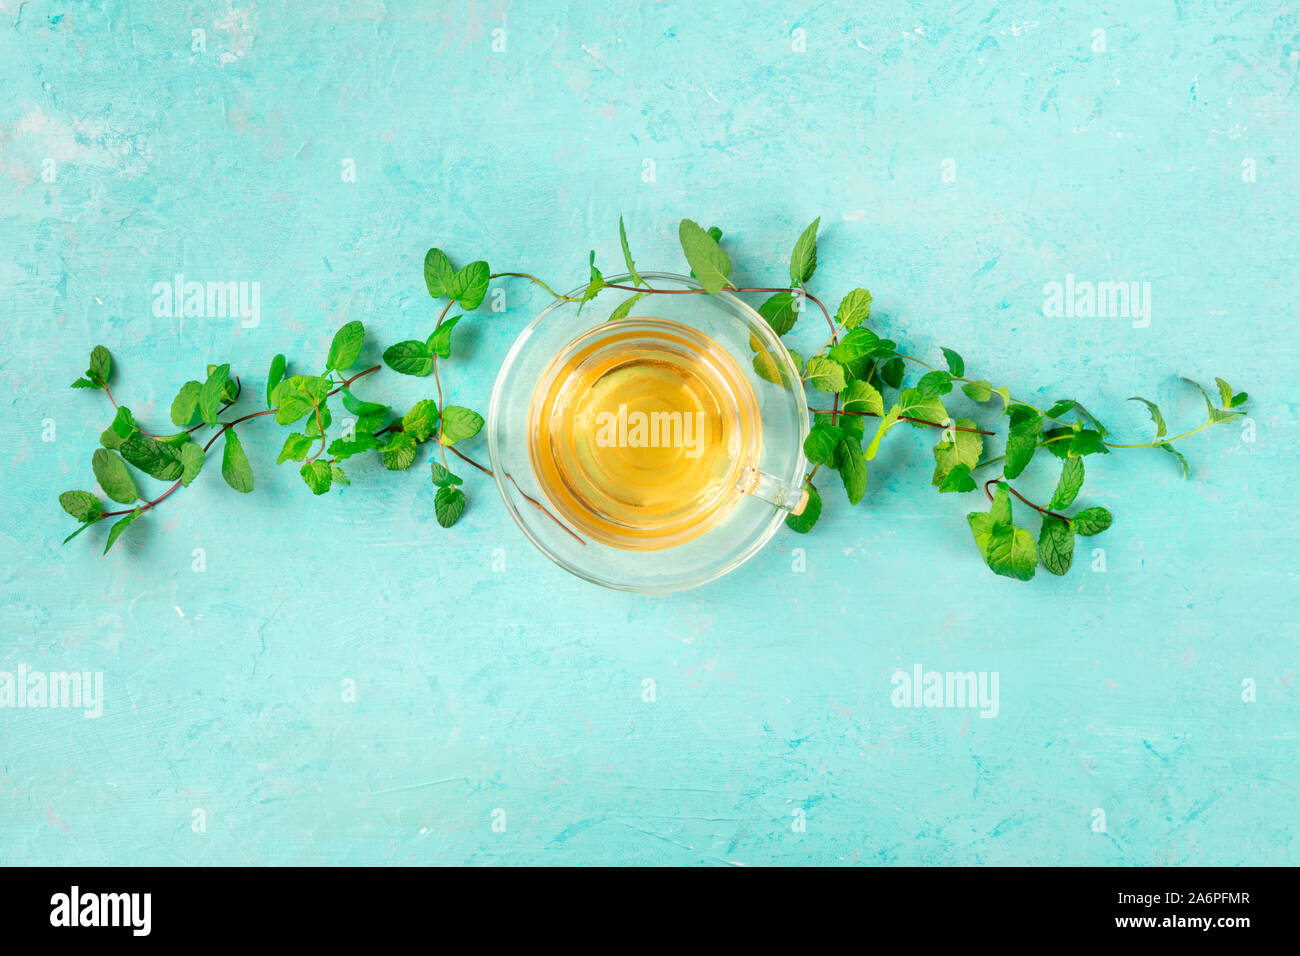 Mint tea cup, overhead shot on a blue background with vibrant fresh mint leaves and copy space Stock Photo